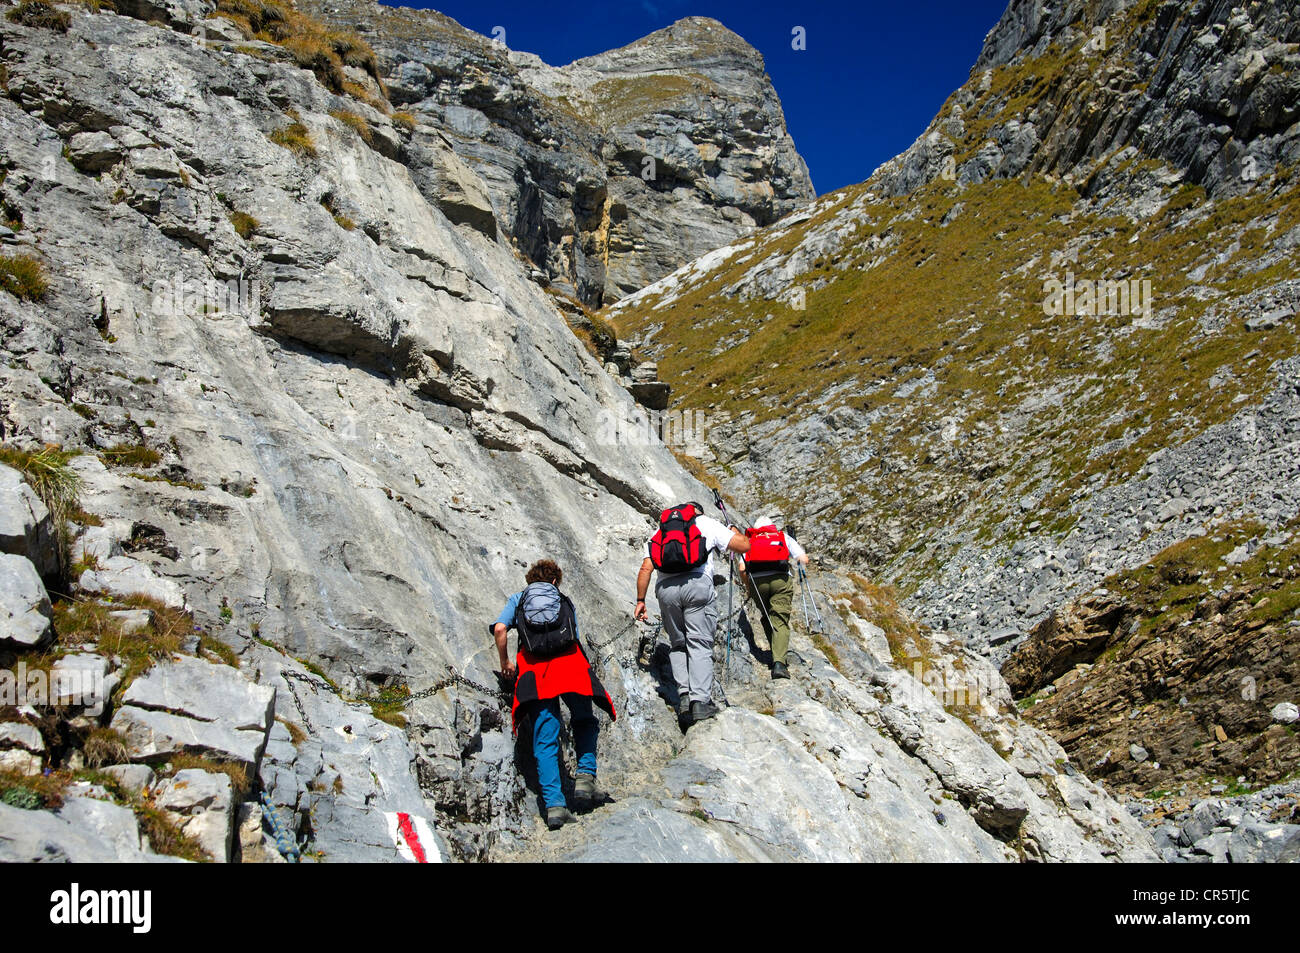 Hikers on a rocky section of the trail secured by metal chains en route to the Laemmerenhuette refuge, Bernese Alps, Switzerland Stock Photo